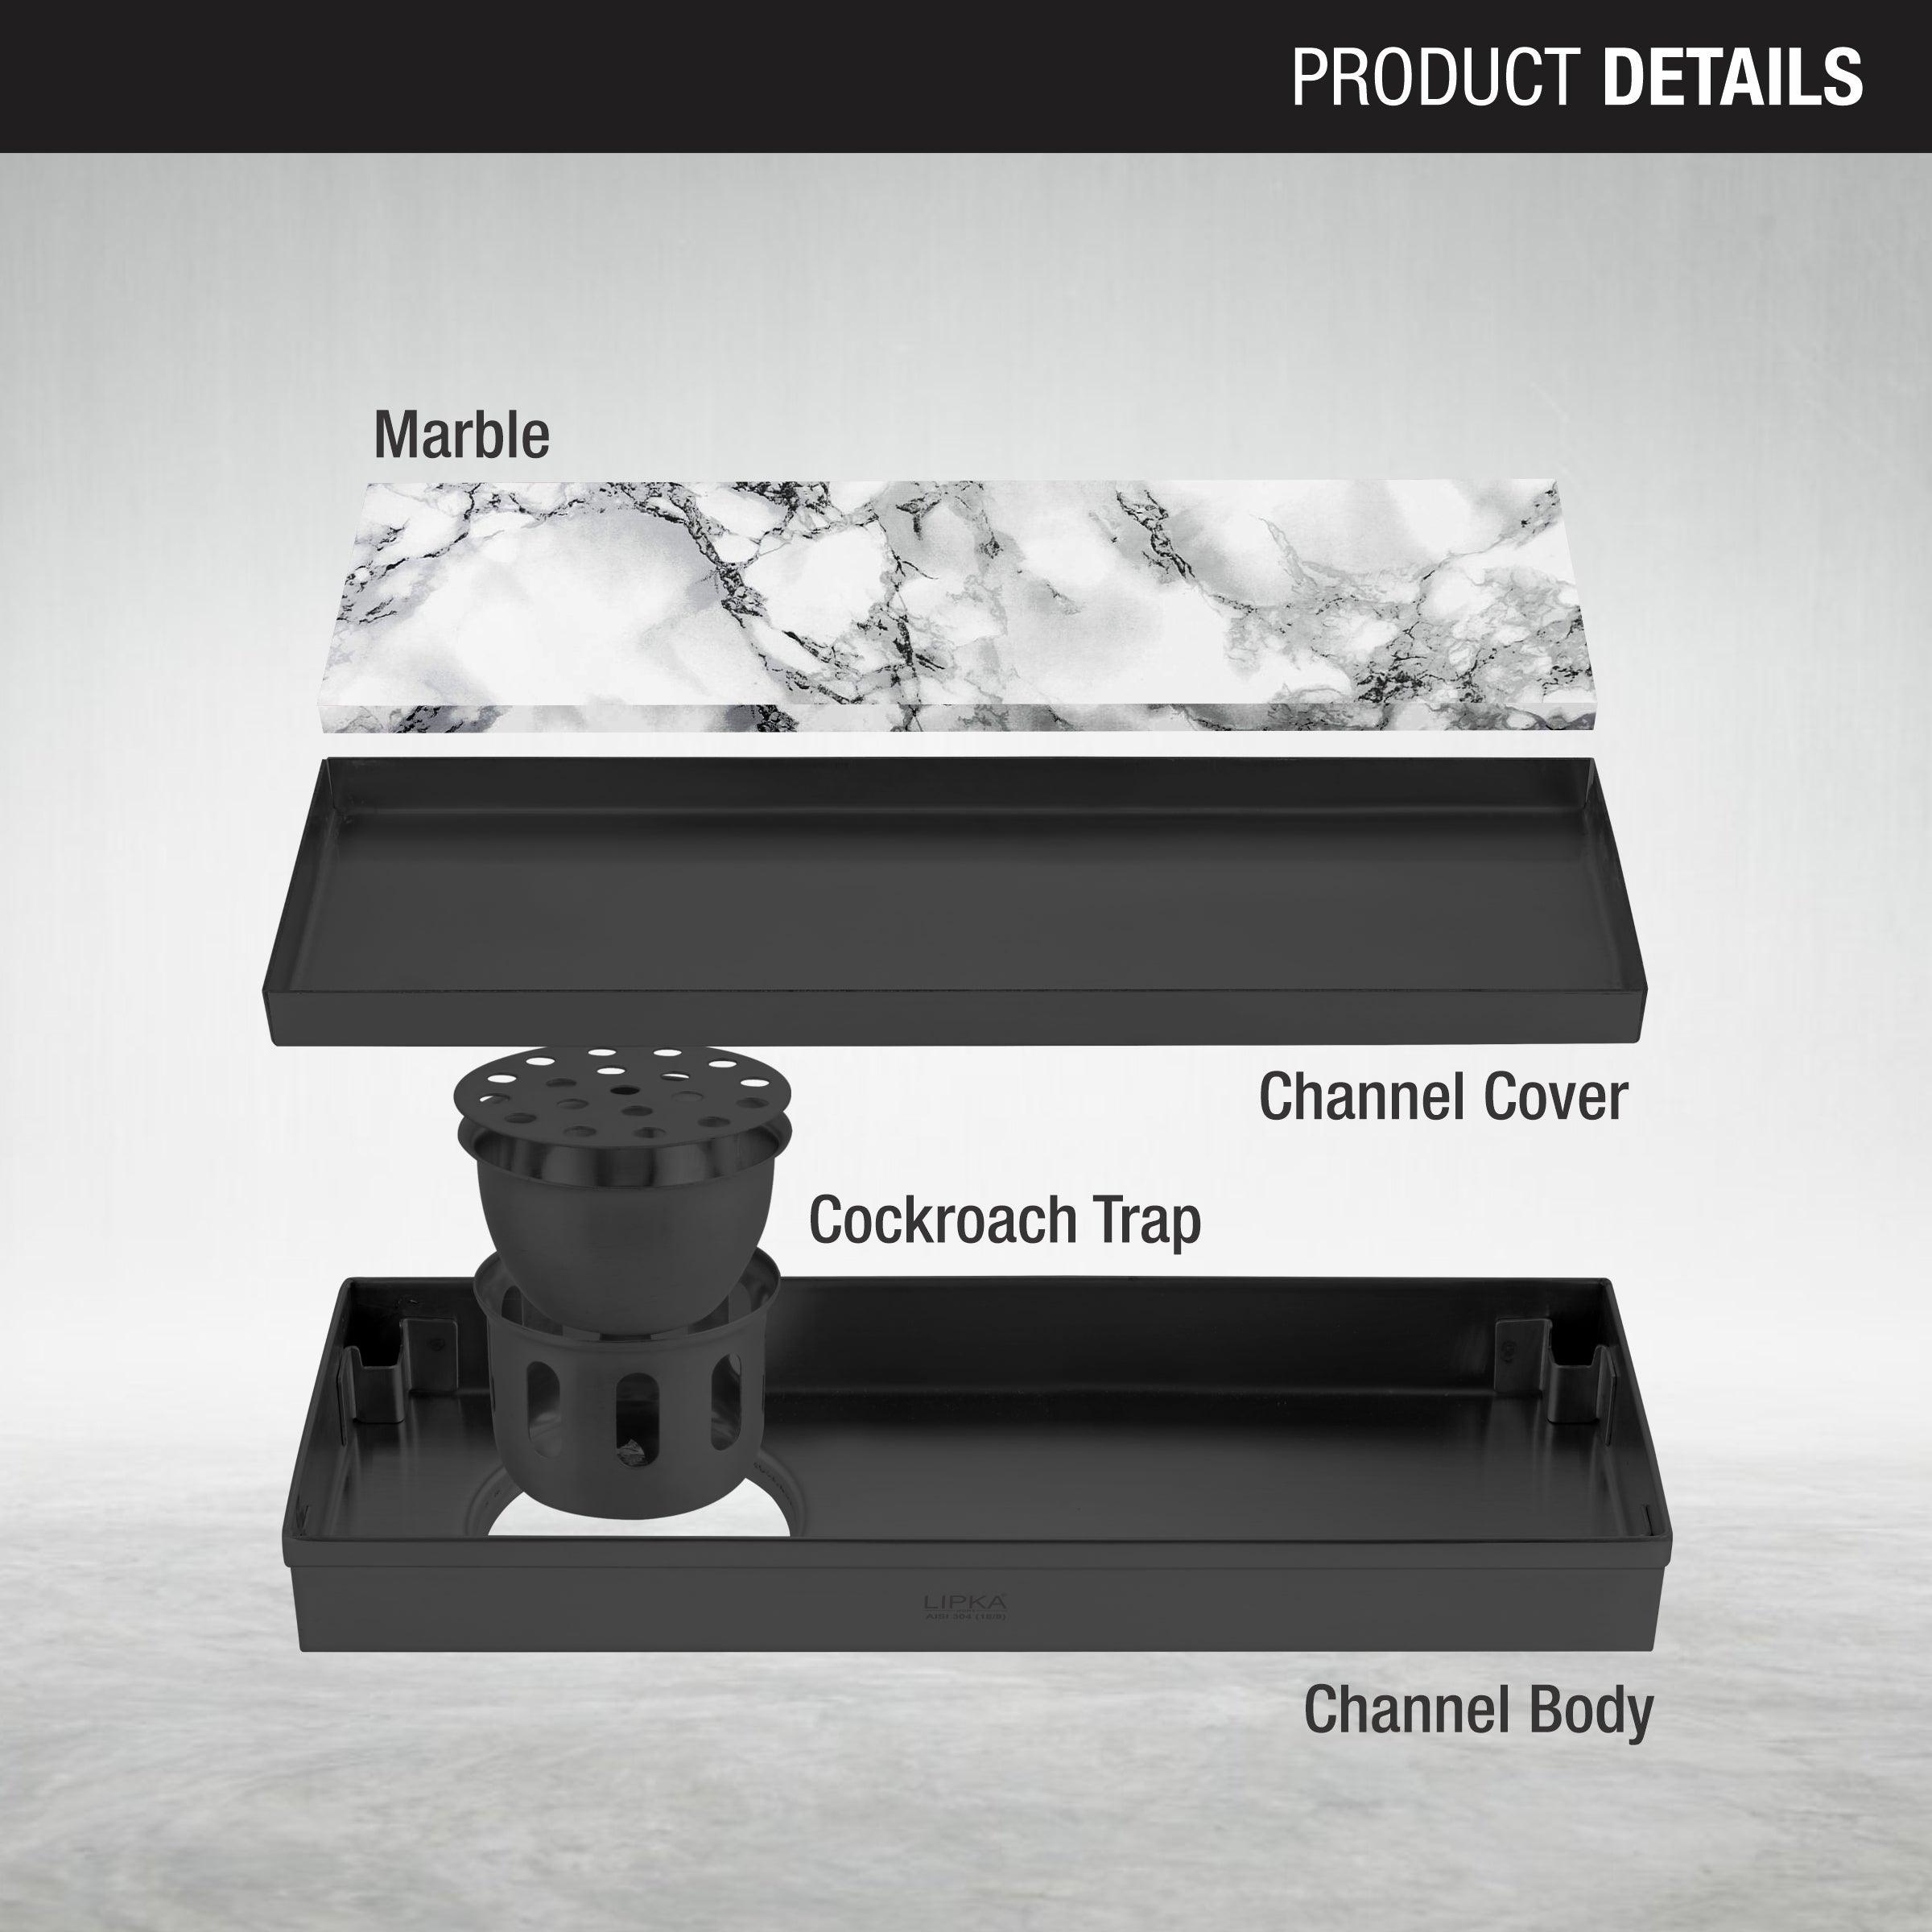 Marble Insert Shower Drain Channel - Black (18 x 5 Inches) parts